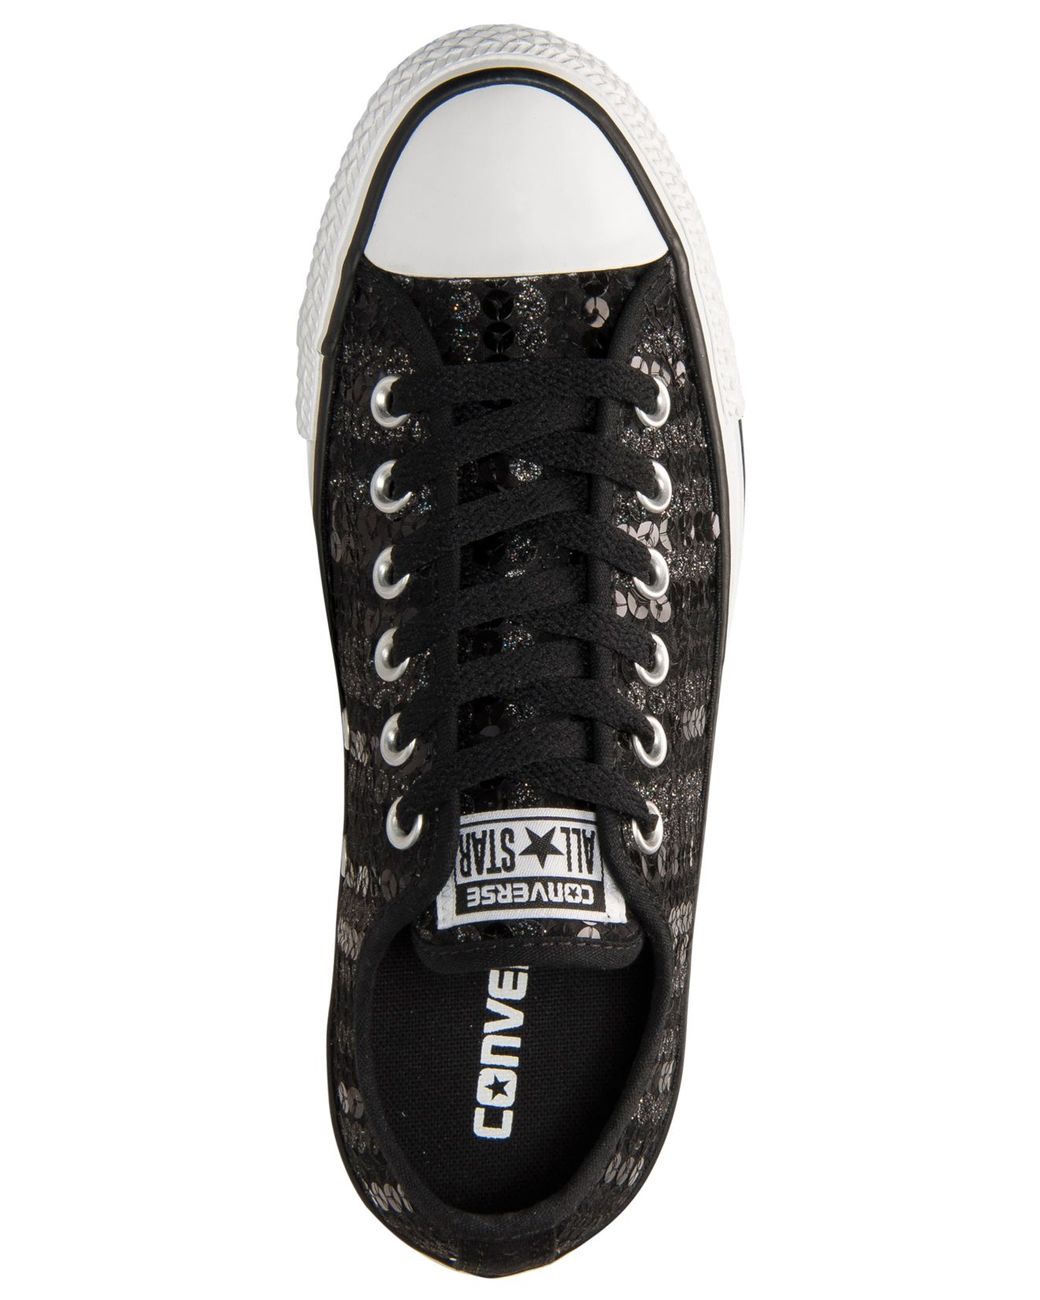 Converse Women's Chuck Taylor Ox Sequin Casual Sneakers From Finish Line in  Black | Lyst